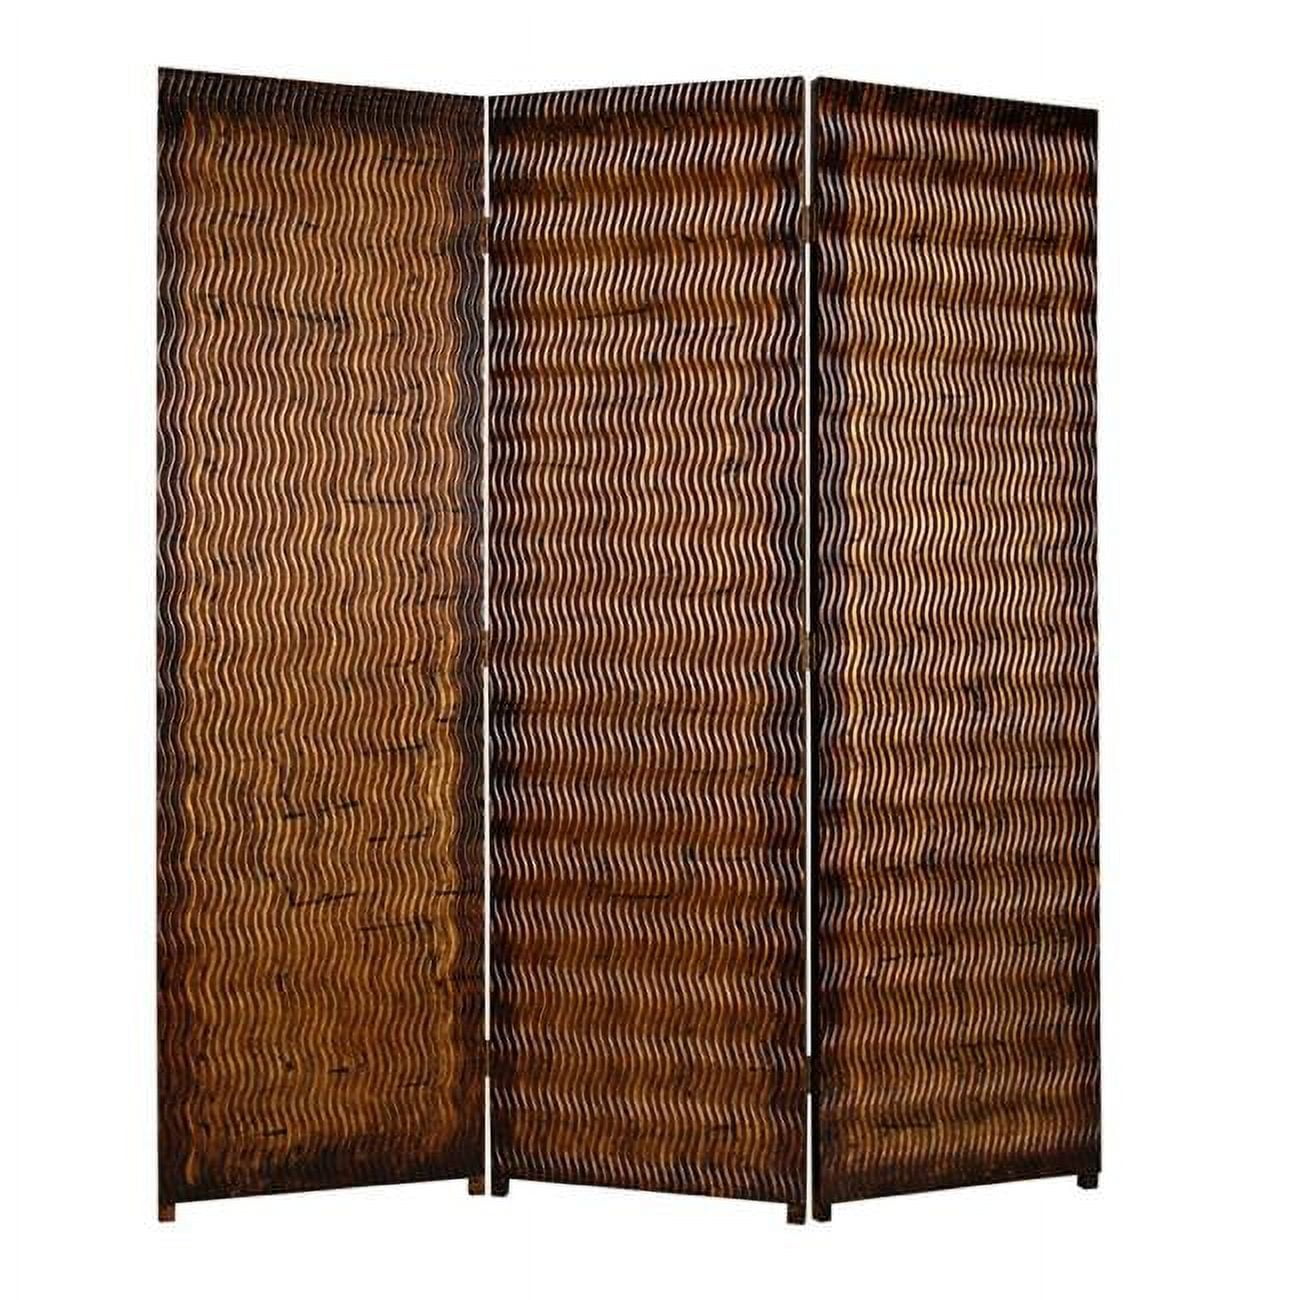 Bm26486 Dual Tone 3 Panel Wooden Foldable Room Divider With Wavy Design, Brown